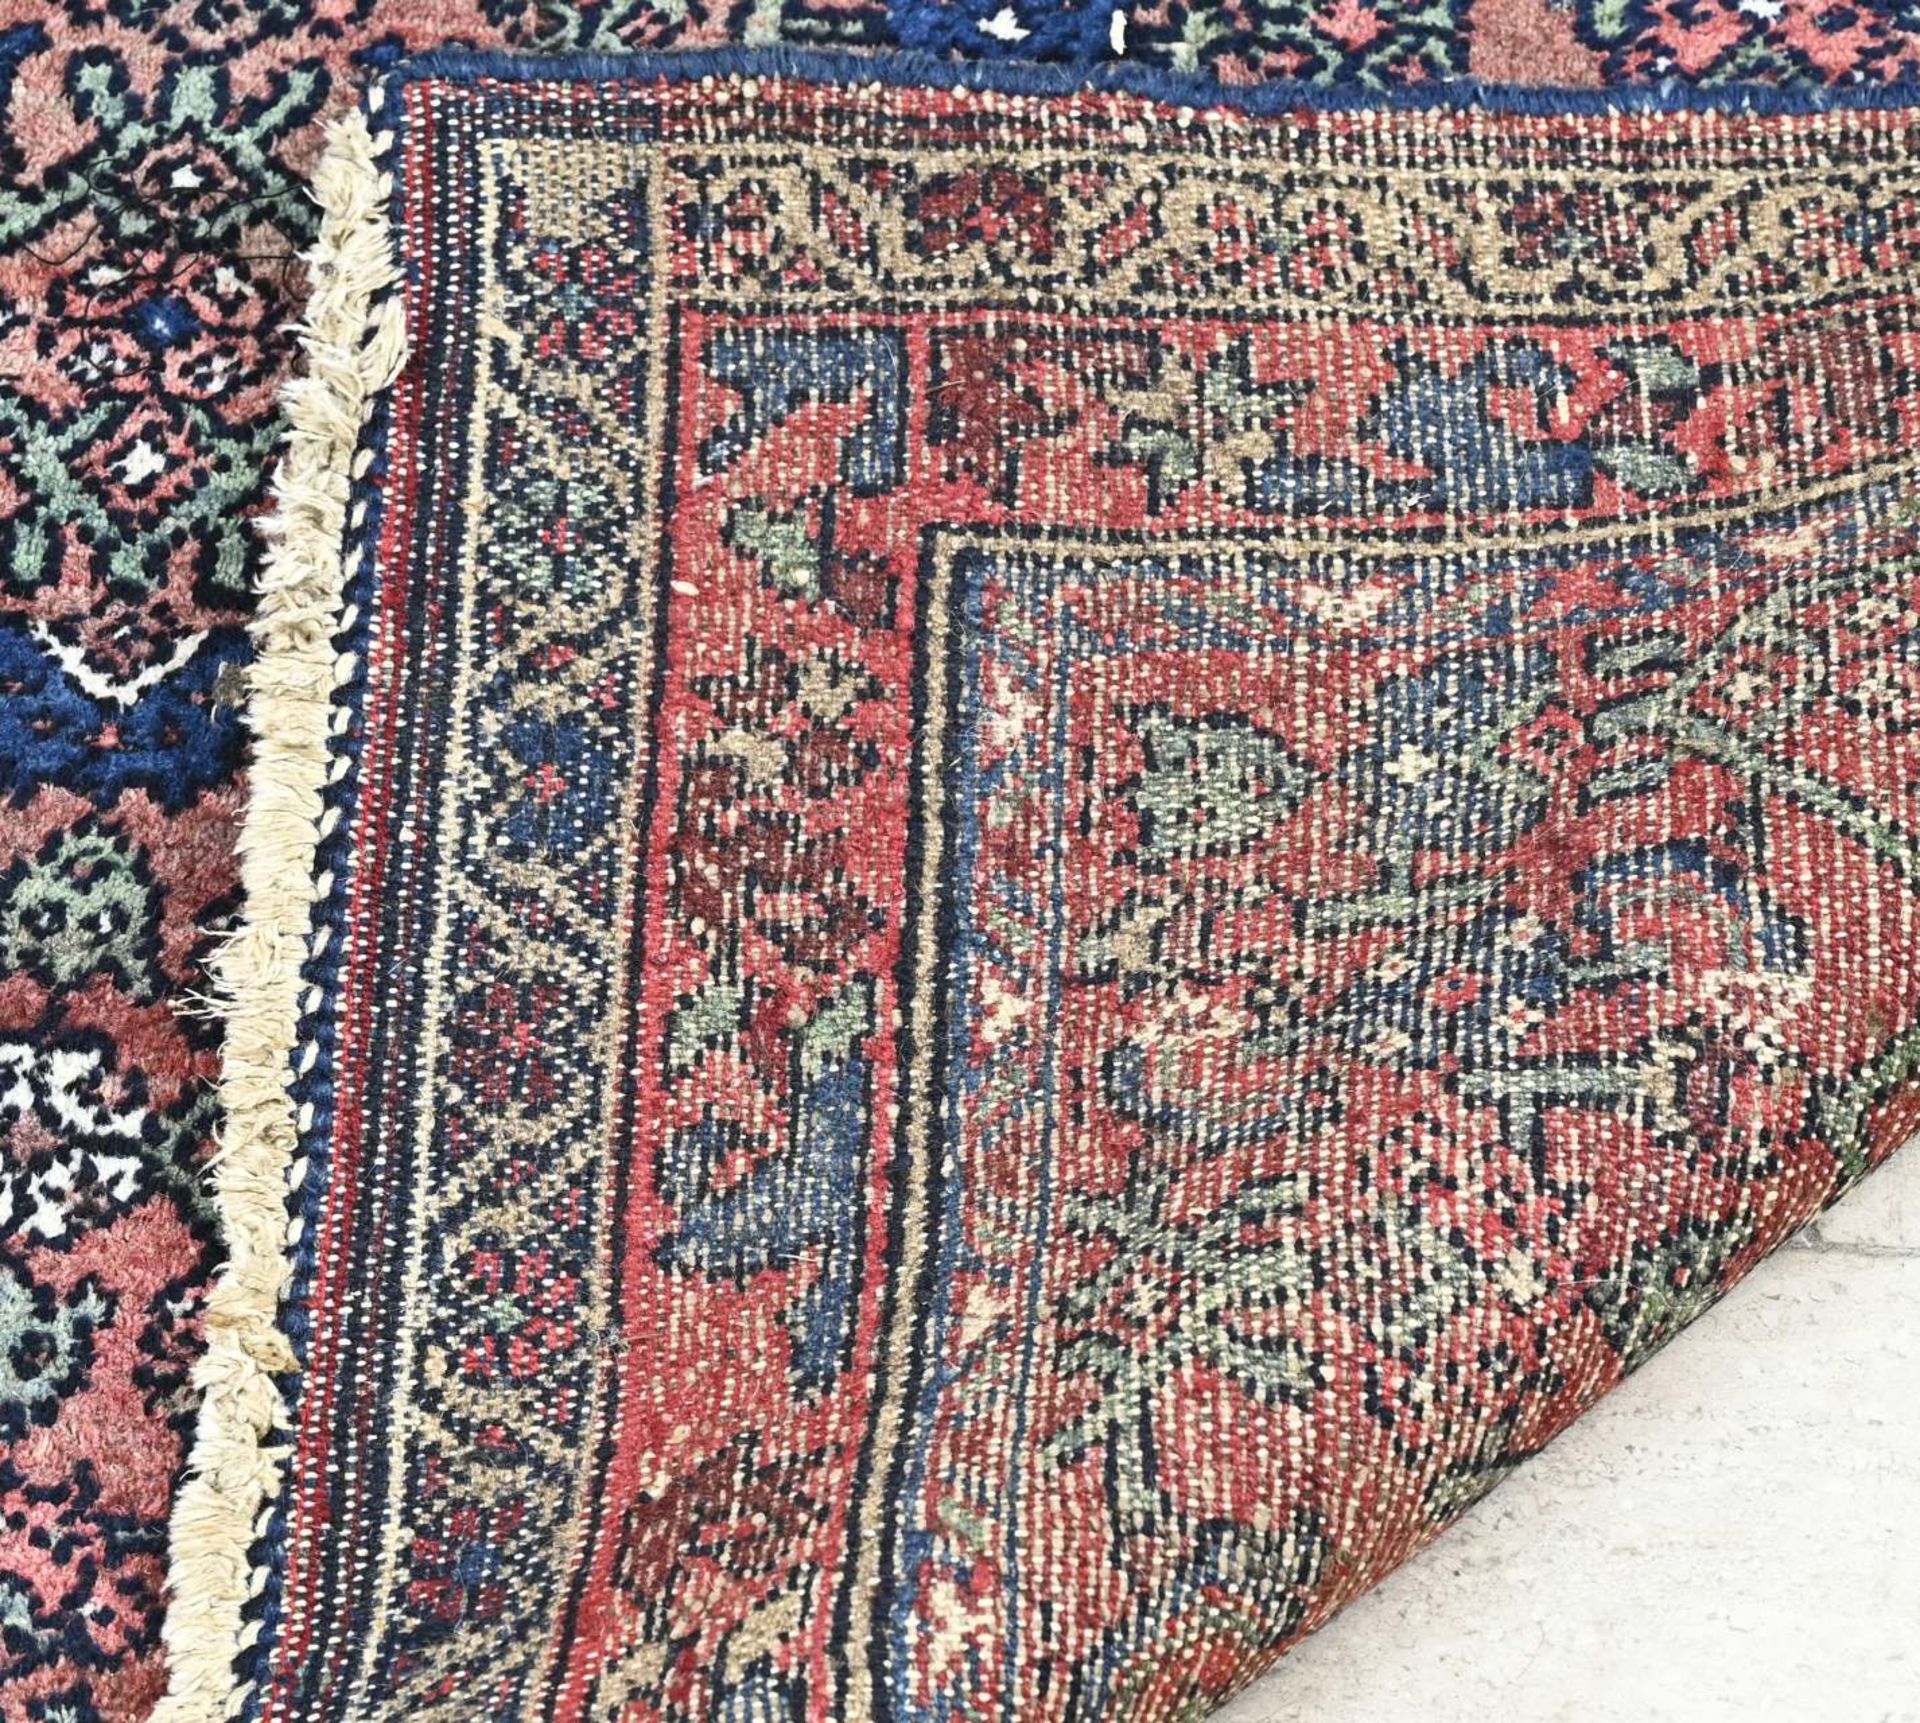 Hand-knotted Persian carpet, 180 x 106 cm. - Image 3 of 3